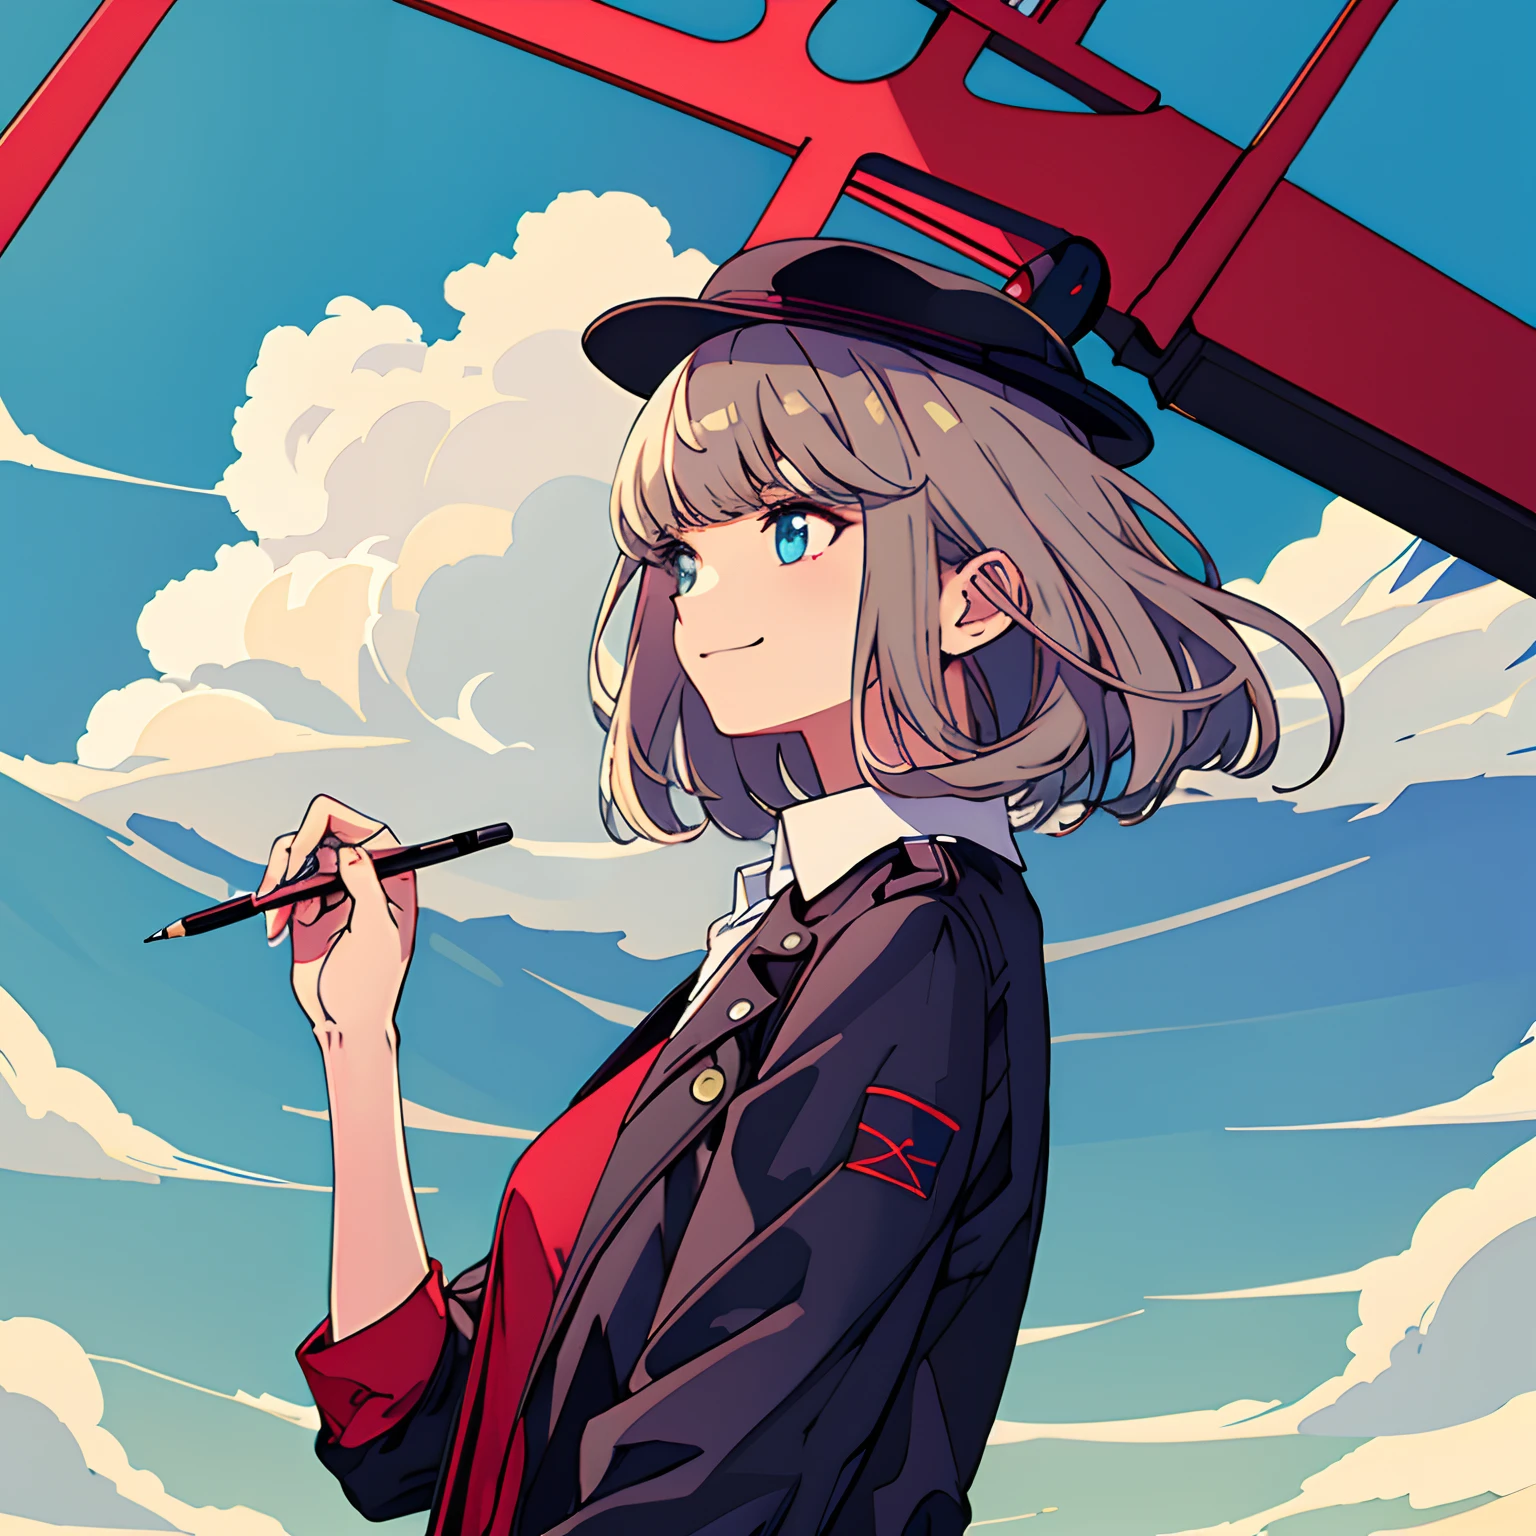 Masterpiece artwork, intricate-detail, best qualityer, blue sky background, sky clear, 1girl, 独奏, painter, capture from the waist up, standingn, notebooks and pen in hand, looking at side, Grinning, painting on a board, brush in hand, English hat, apron, mid hair, hair blonde, english clothes, long sleeves, from sideways, perfil,